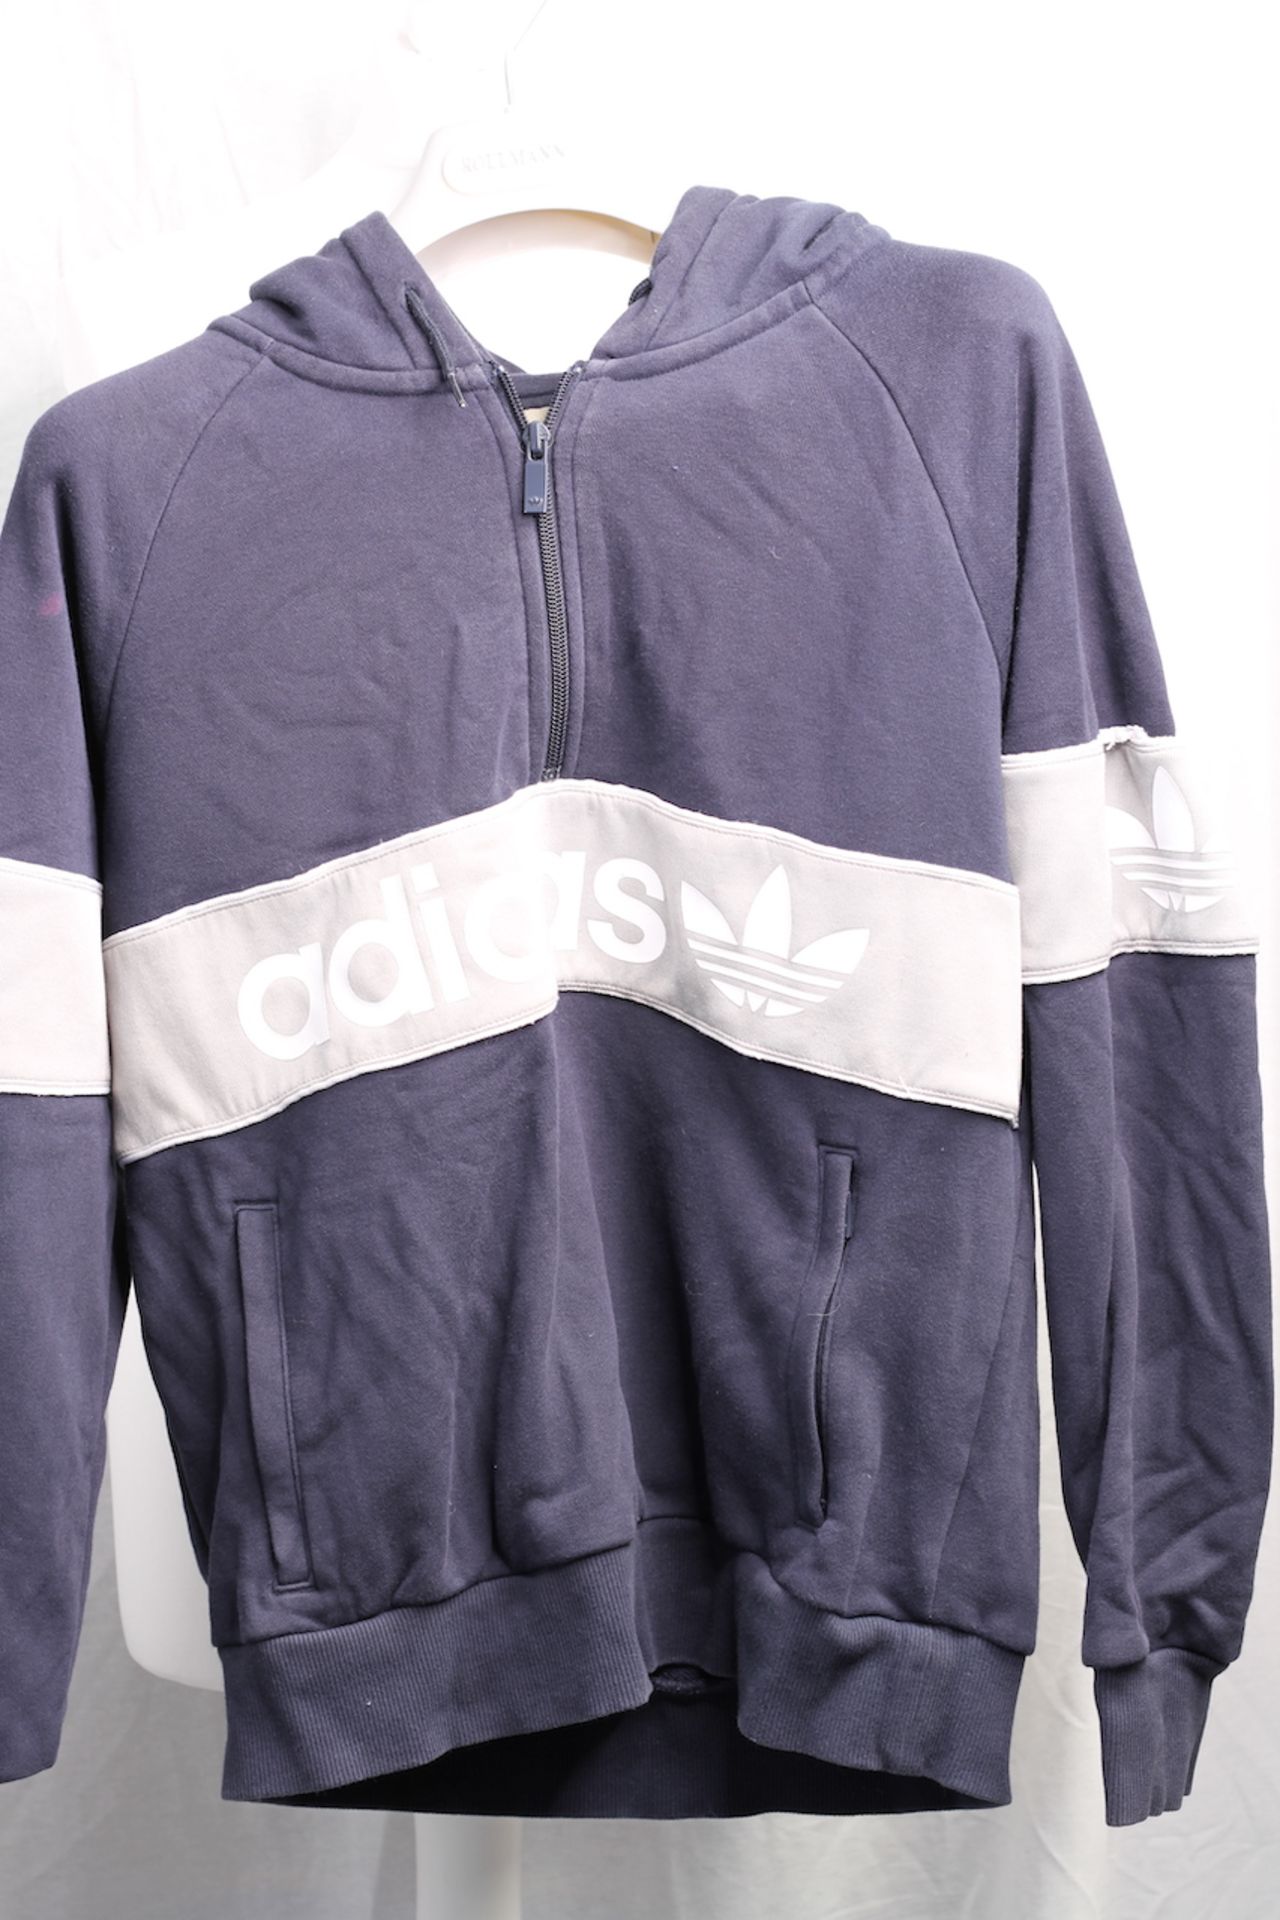 ADIDAS HOODY, Colour : NAVY BLUE AND GREY, AGE: UNKNOWN, SIZE: 8, CONDITION GRADE: OK * TO BE SOLD